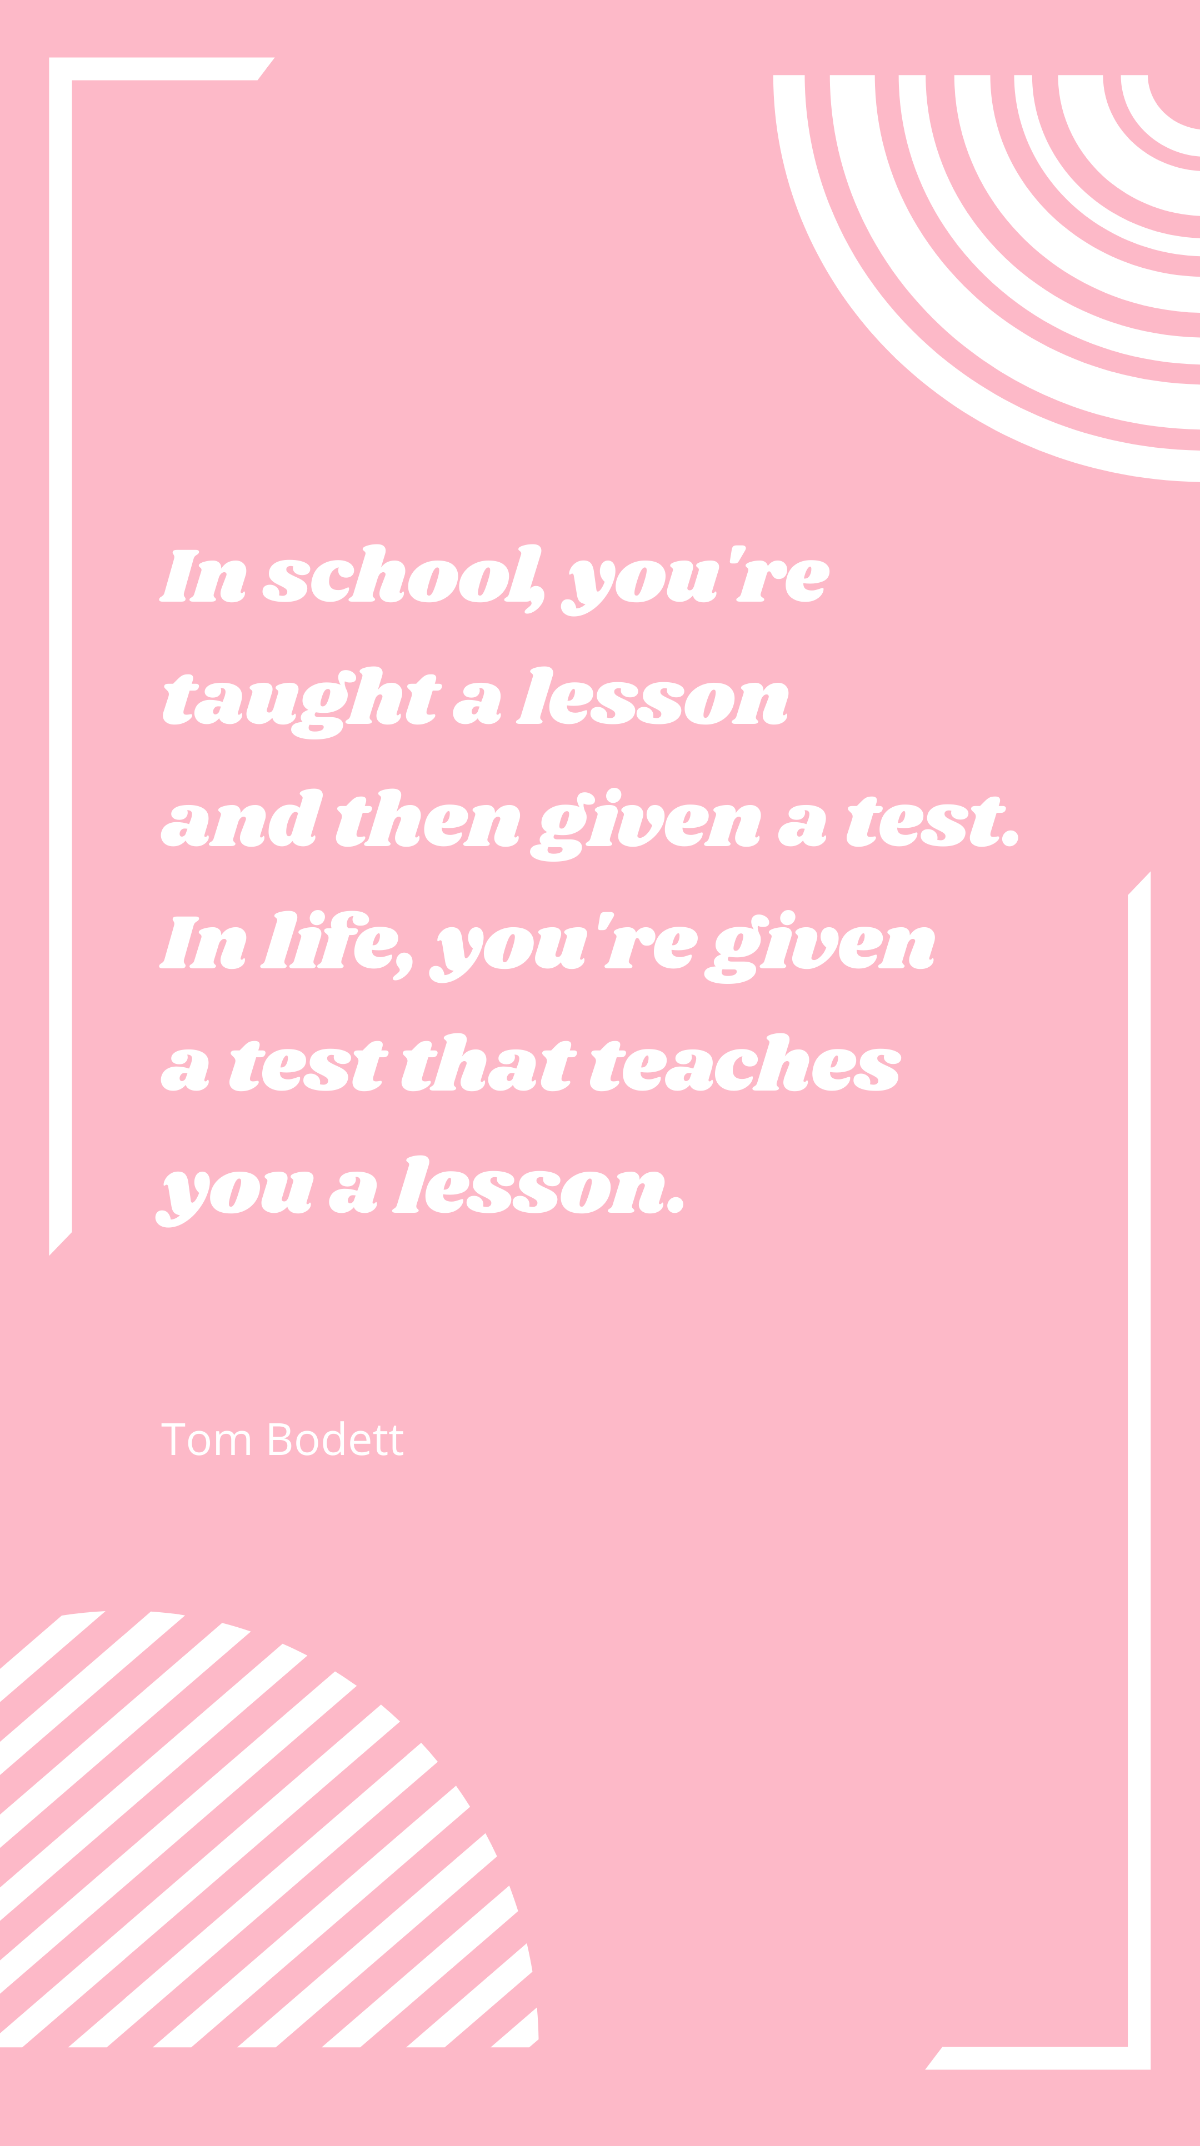 Tom Bodett - In school, you're taught a lesson and then given a test. In life, you're given a test that teaches you a lesson. Template